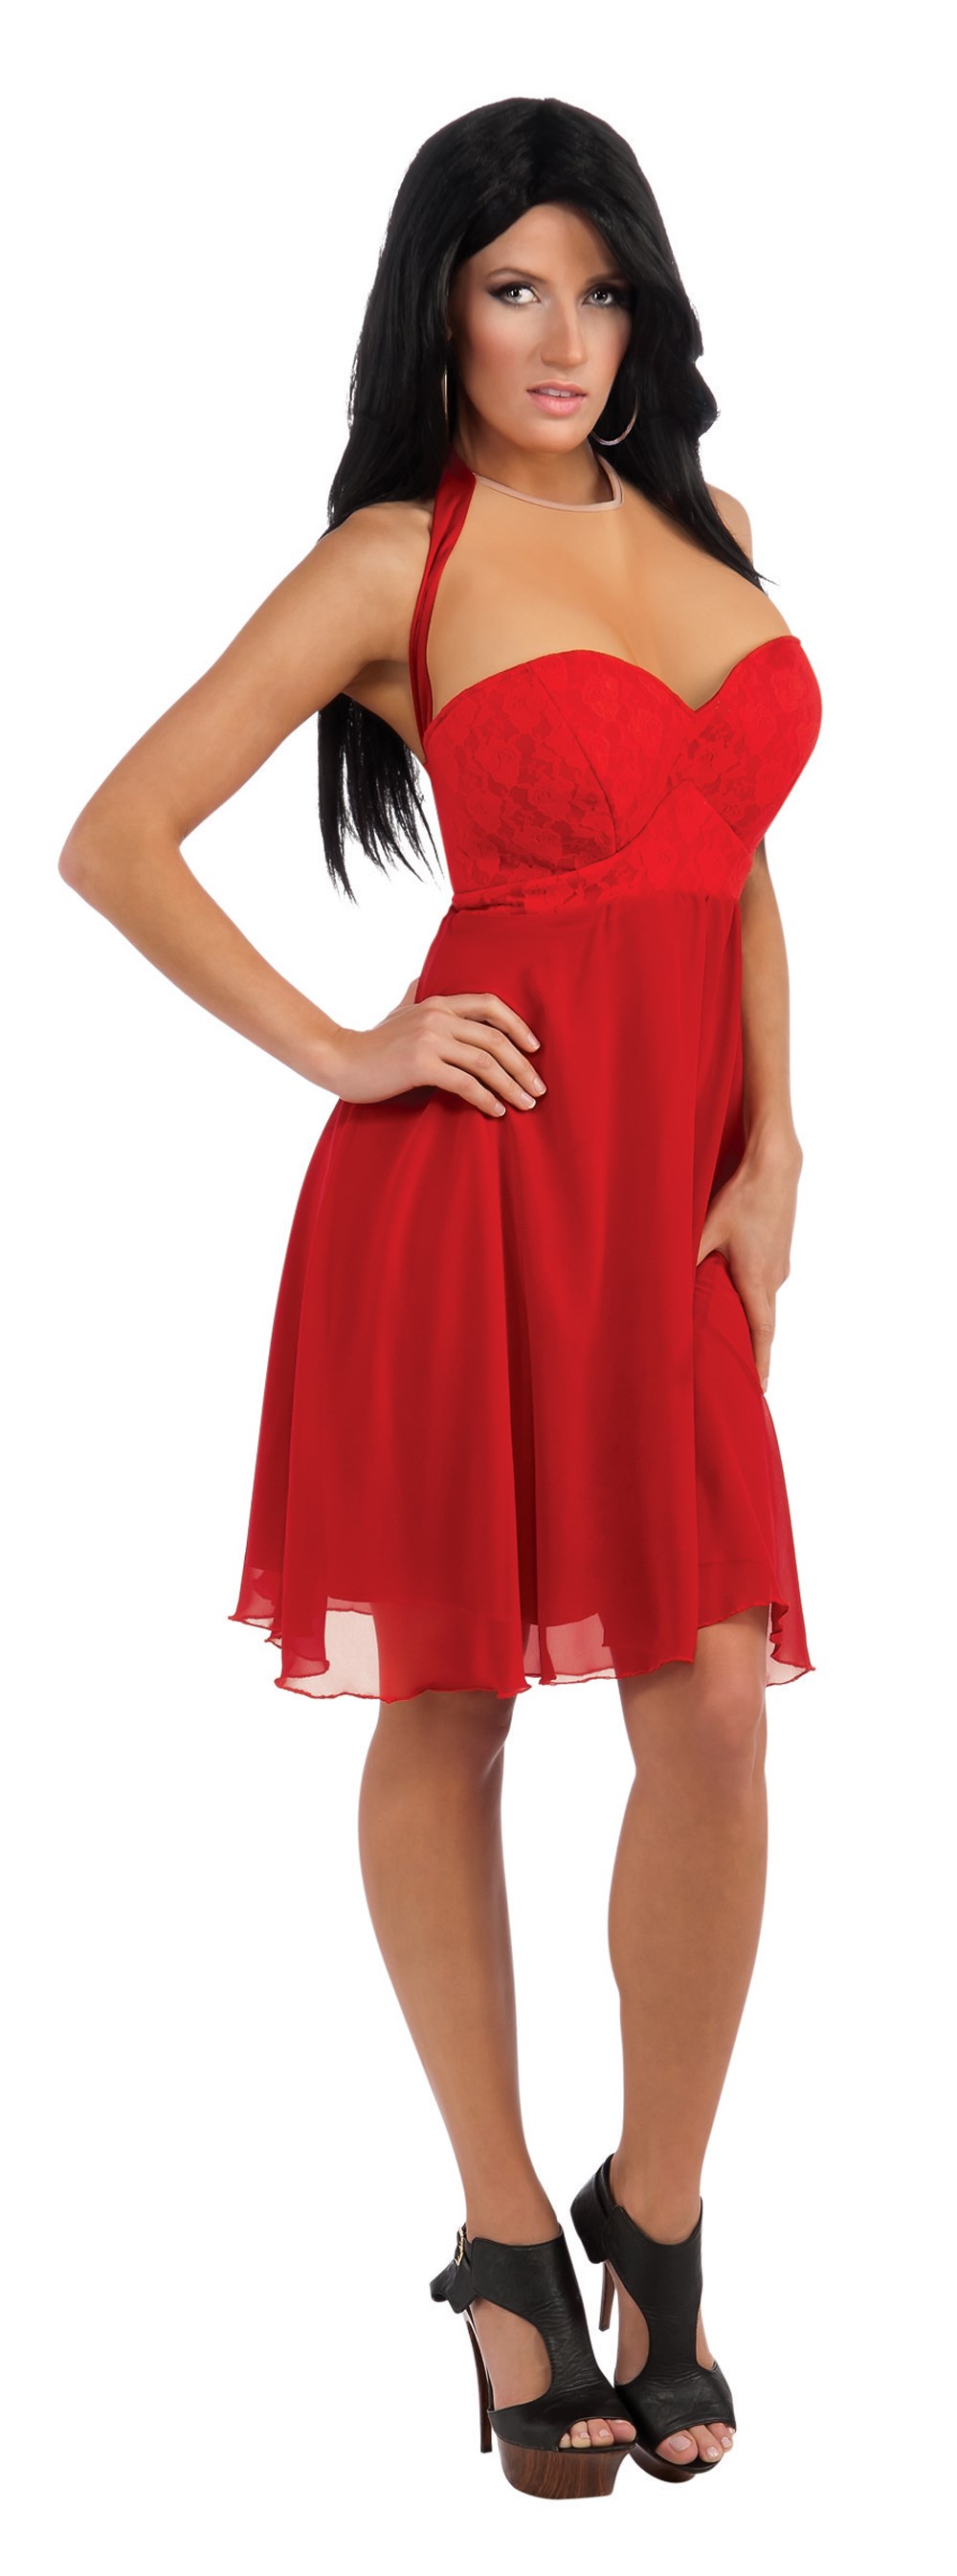 Jersey Shore JWoWW Red Dress Adult Costume